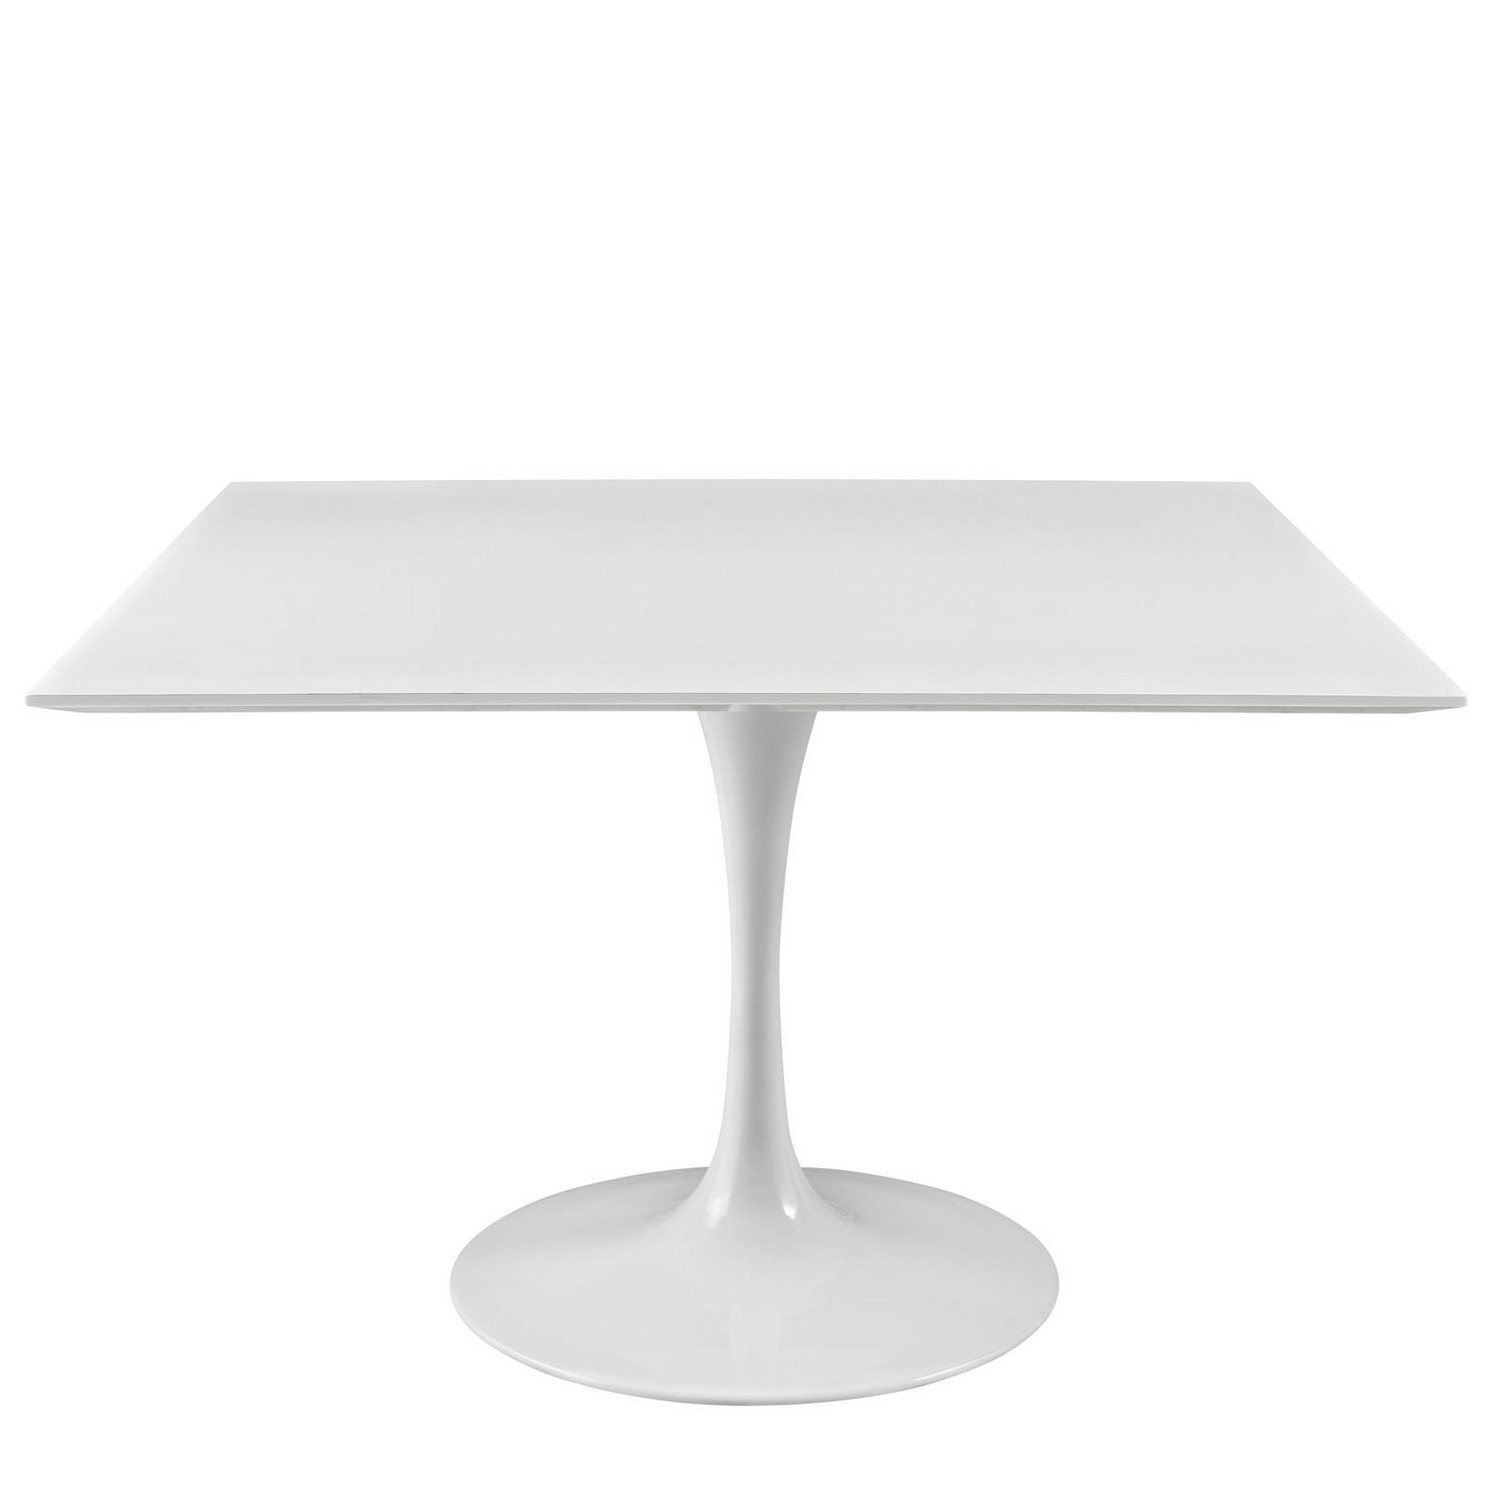 Modway Lippa 47 Square Wood Top Dining Table - White